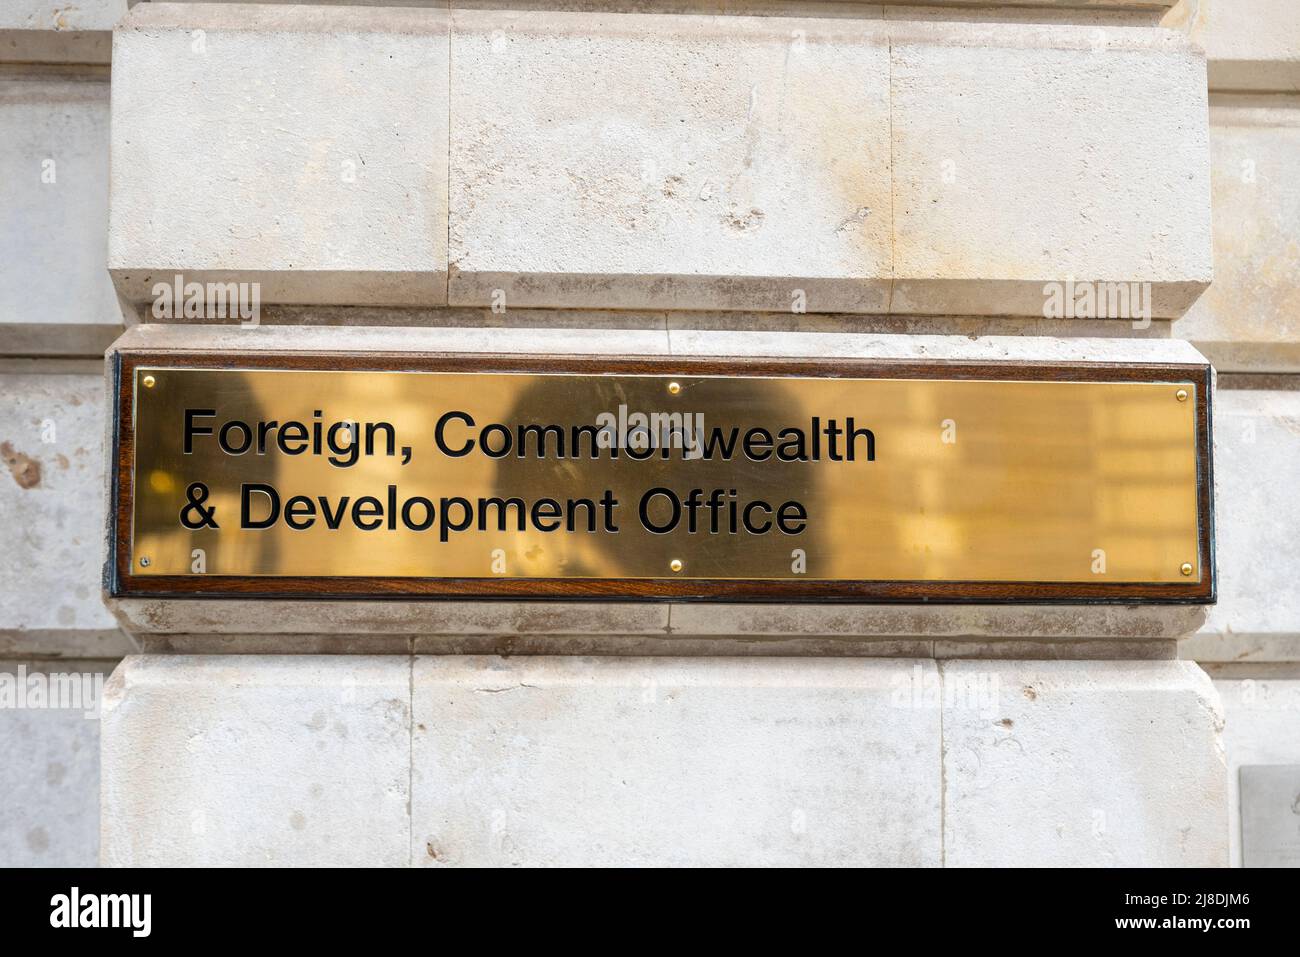 Foreign, Commonwealth & Development Office in Westminster, London, UK. Office of Secretary of State for Foreign, Commonwealth and Development Affairs Stock Photo